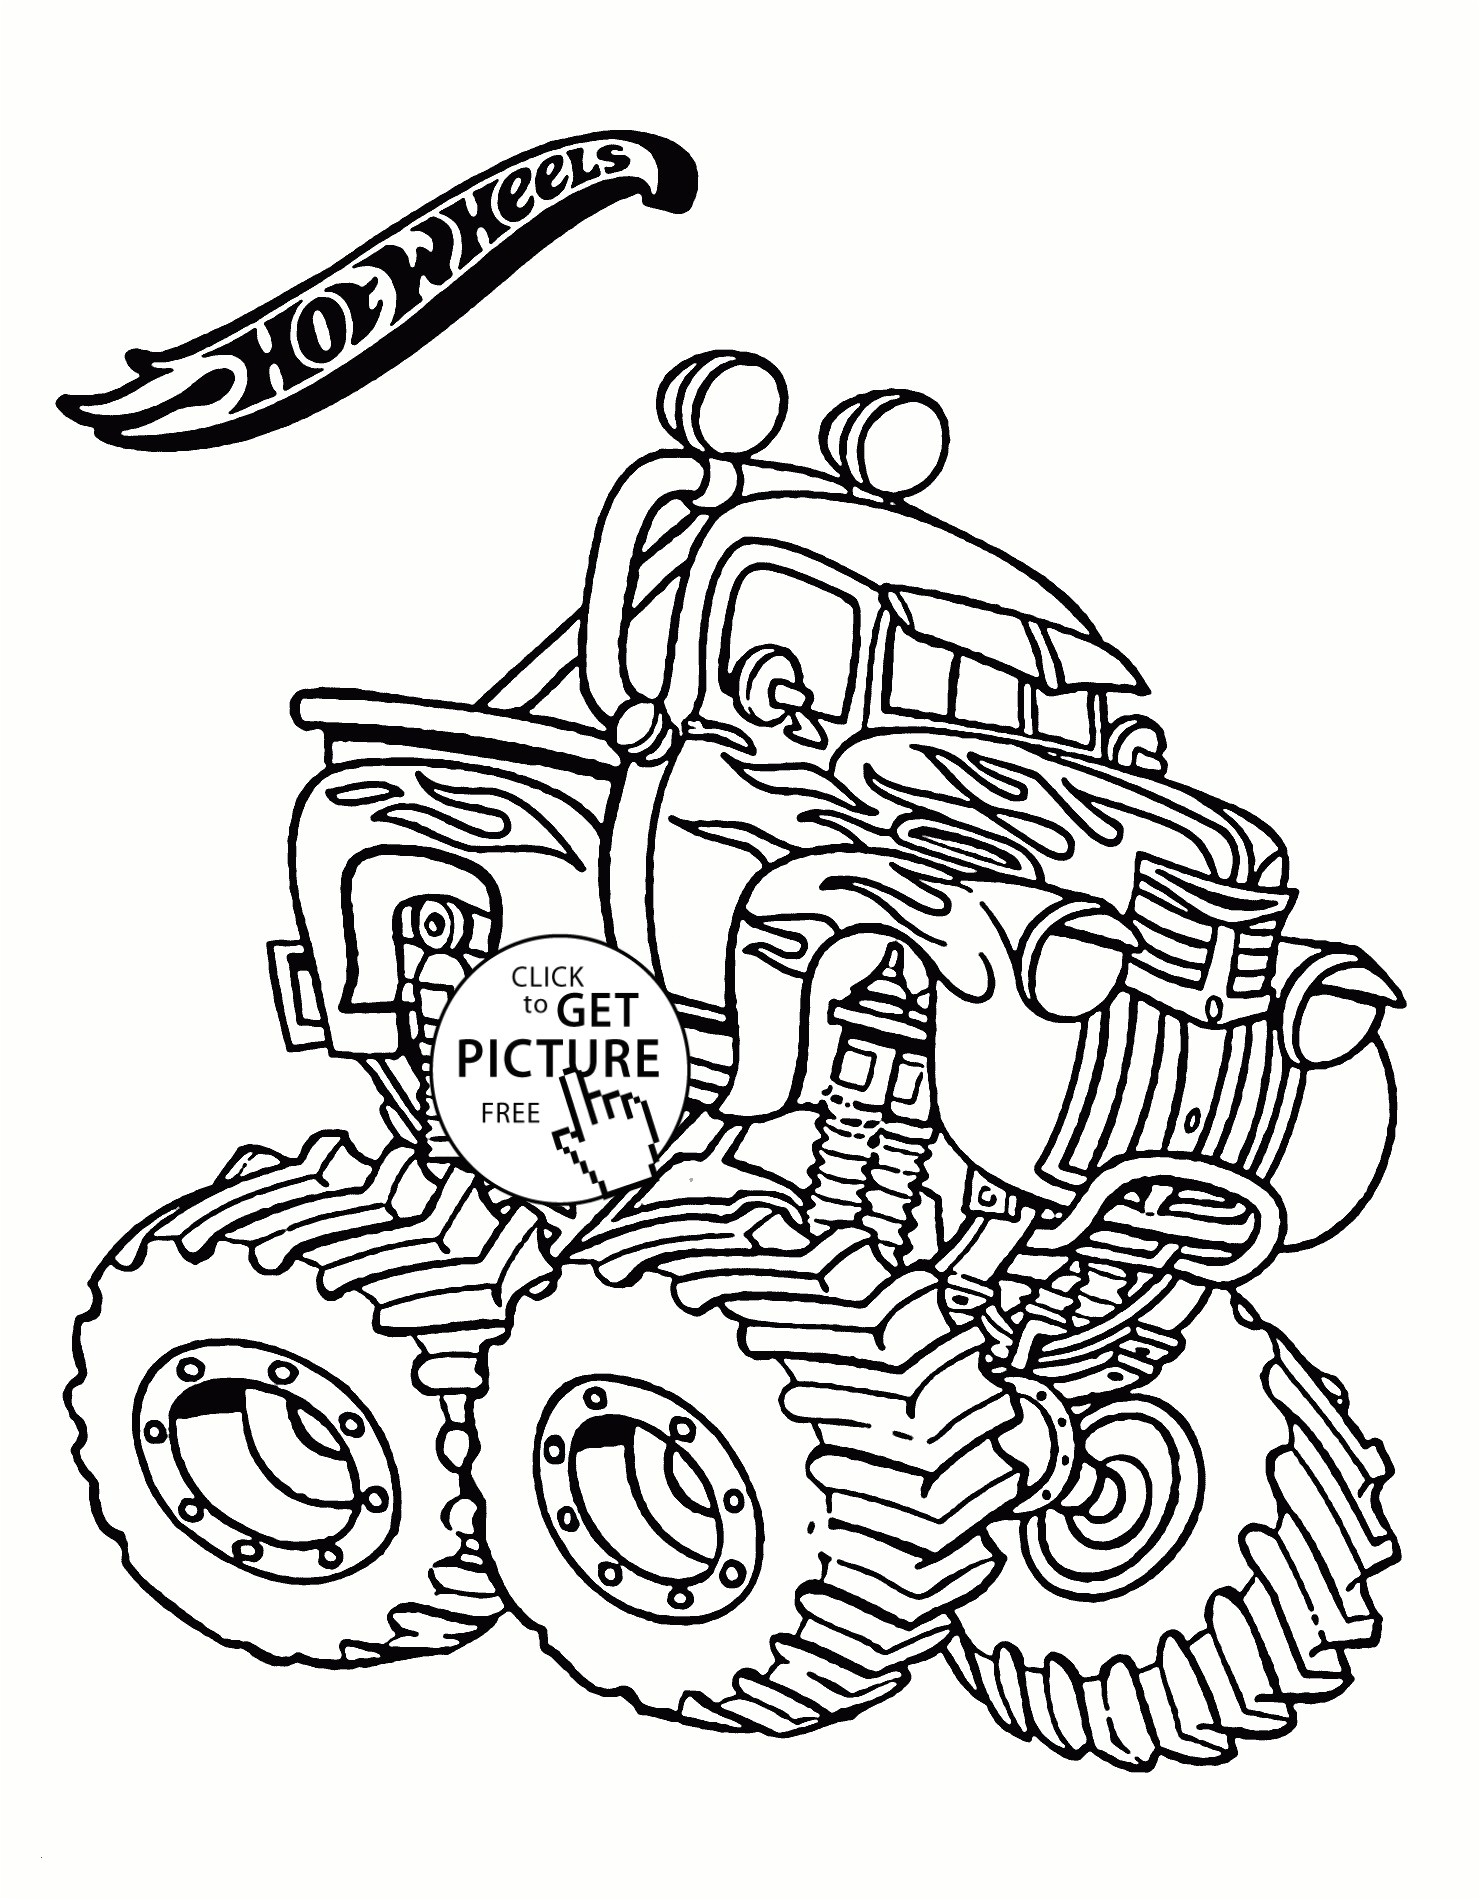 Hot Wheels Monster Truck coloring page for kids transportation coloring pages printables free Wuppsy